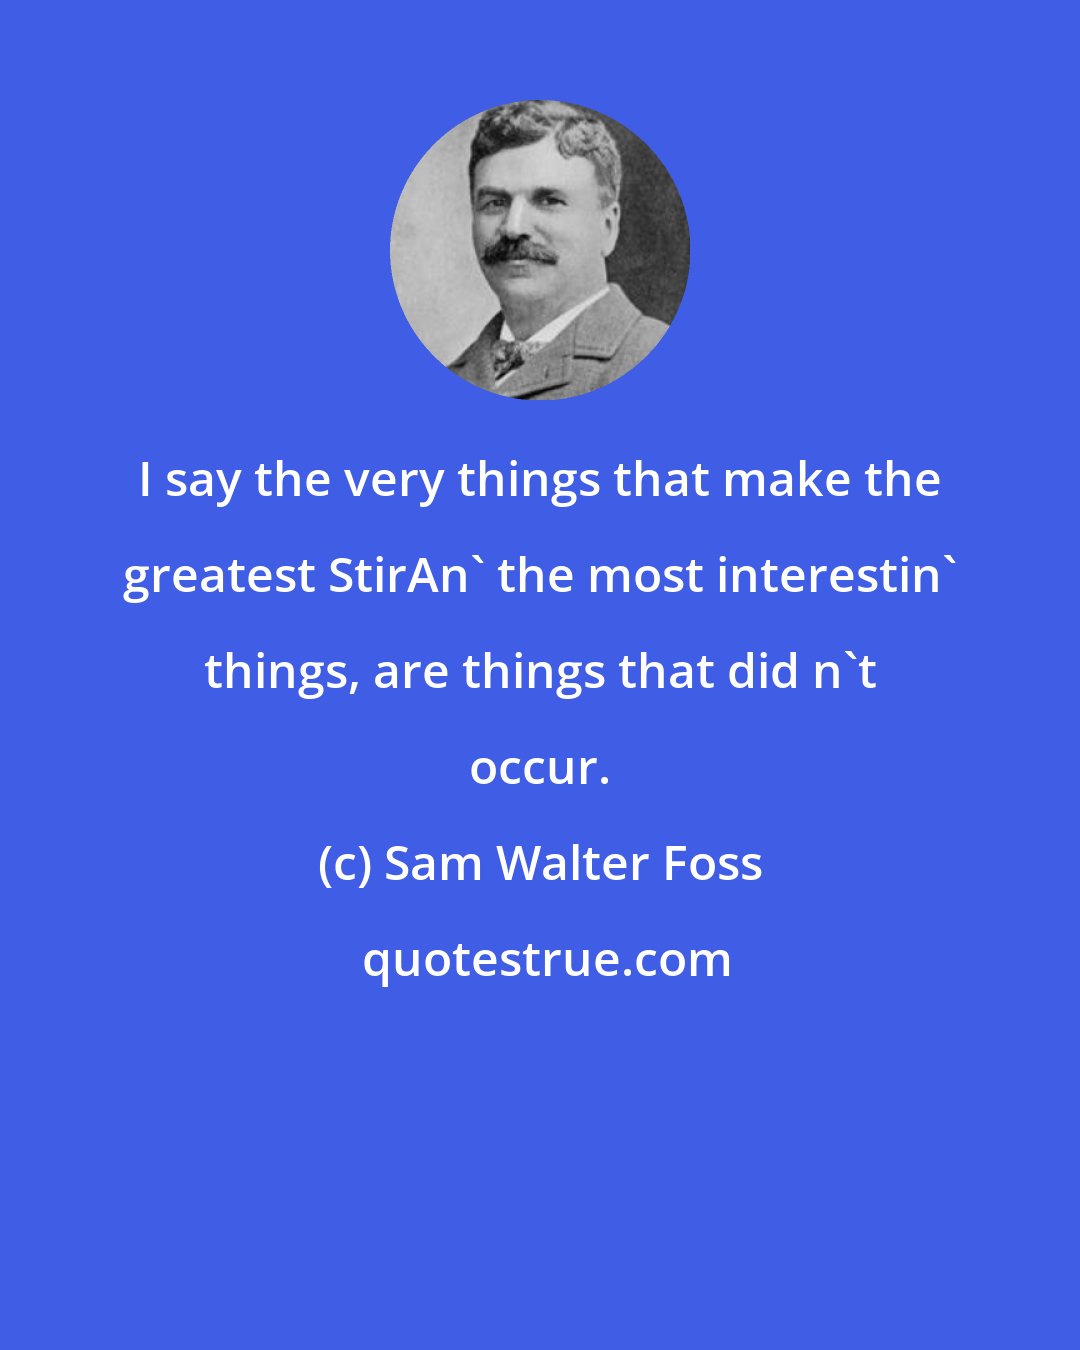 Sam Walter Foss: I say the very things that make the greatest StirAn' the most interestin' things, are things that did n't occur.